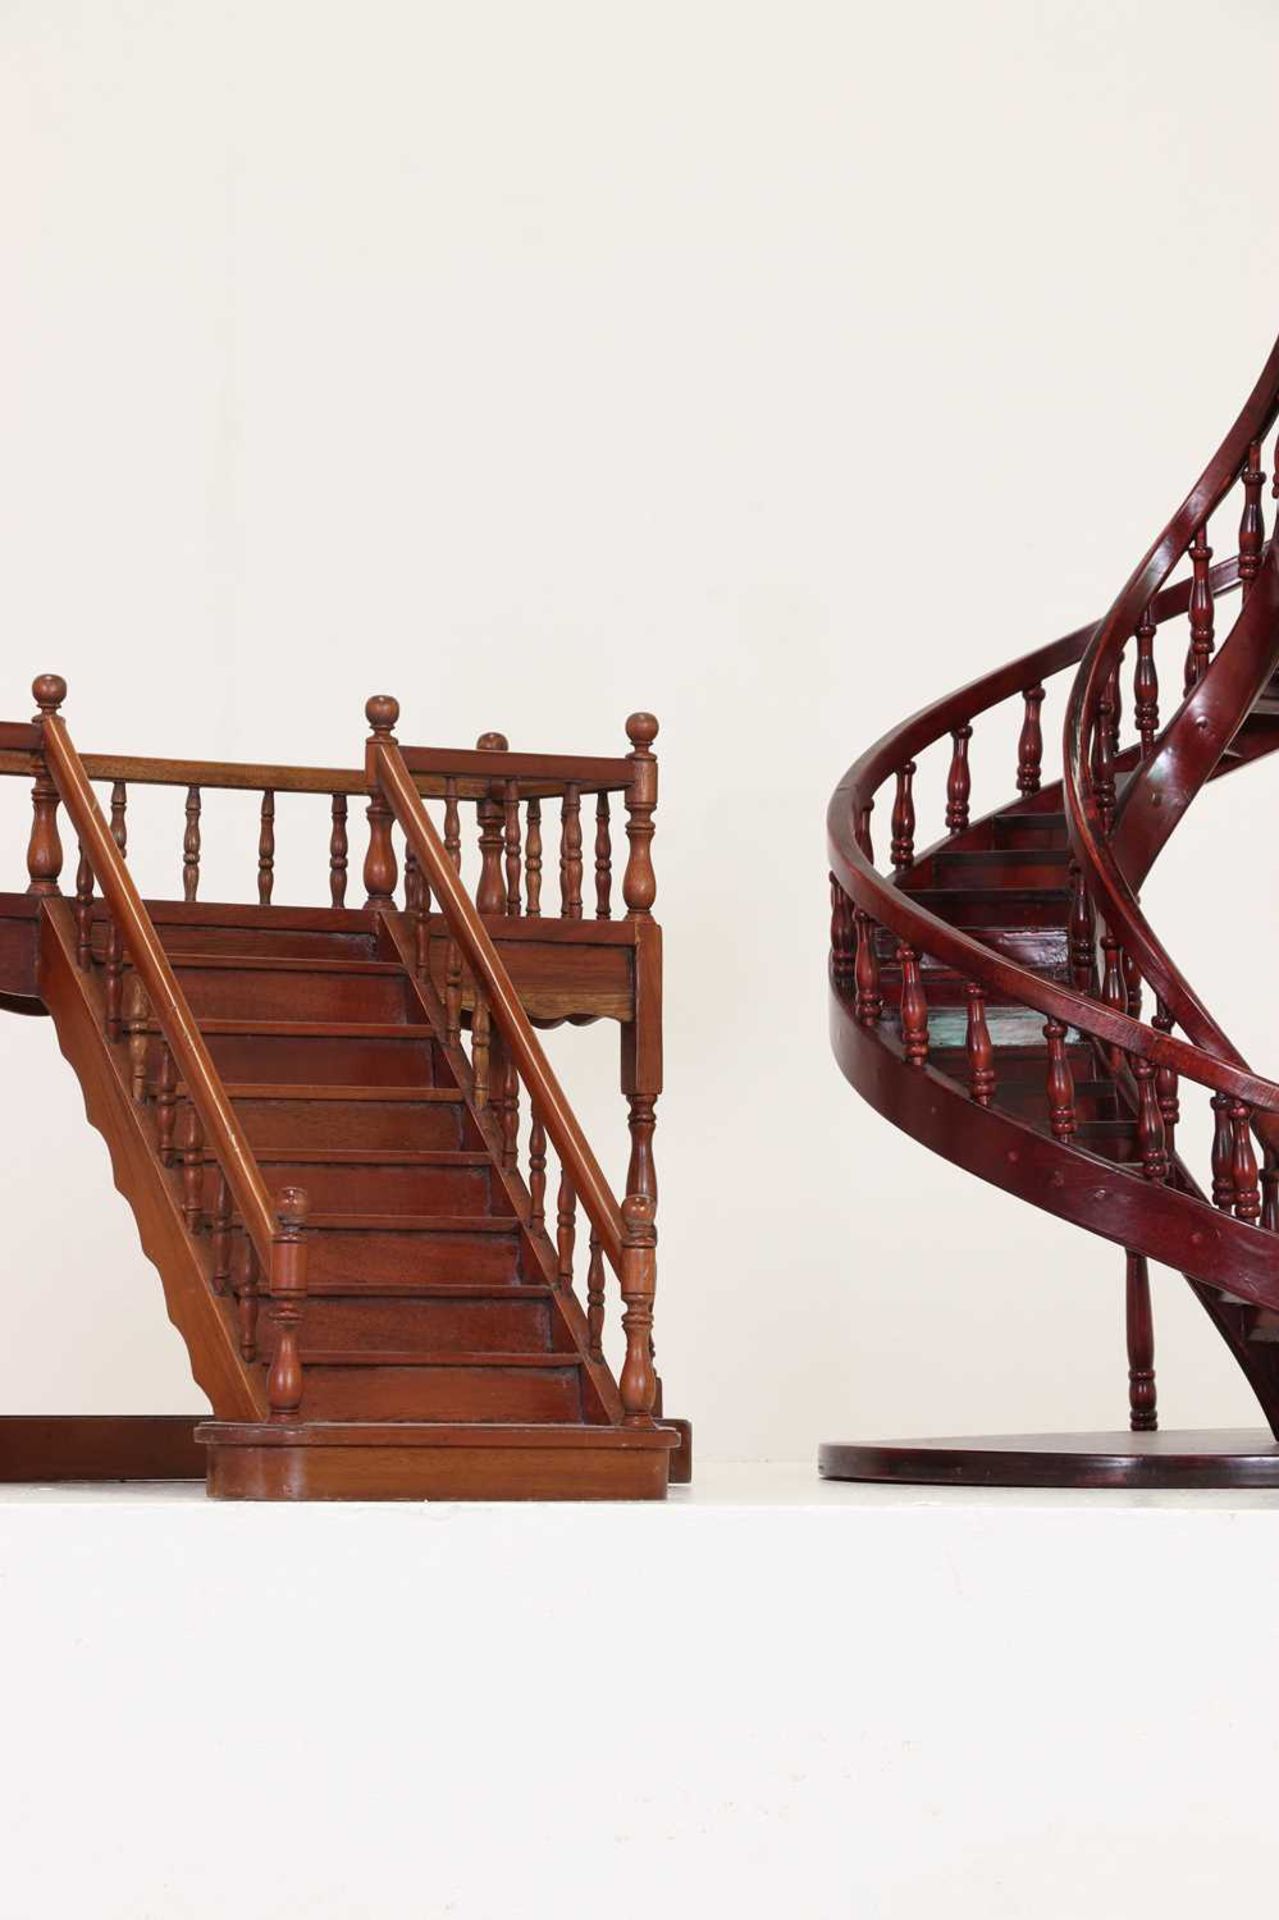 Two wooden architectural models of staircases, - Bild 5 aus 39